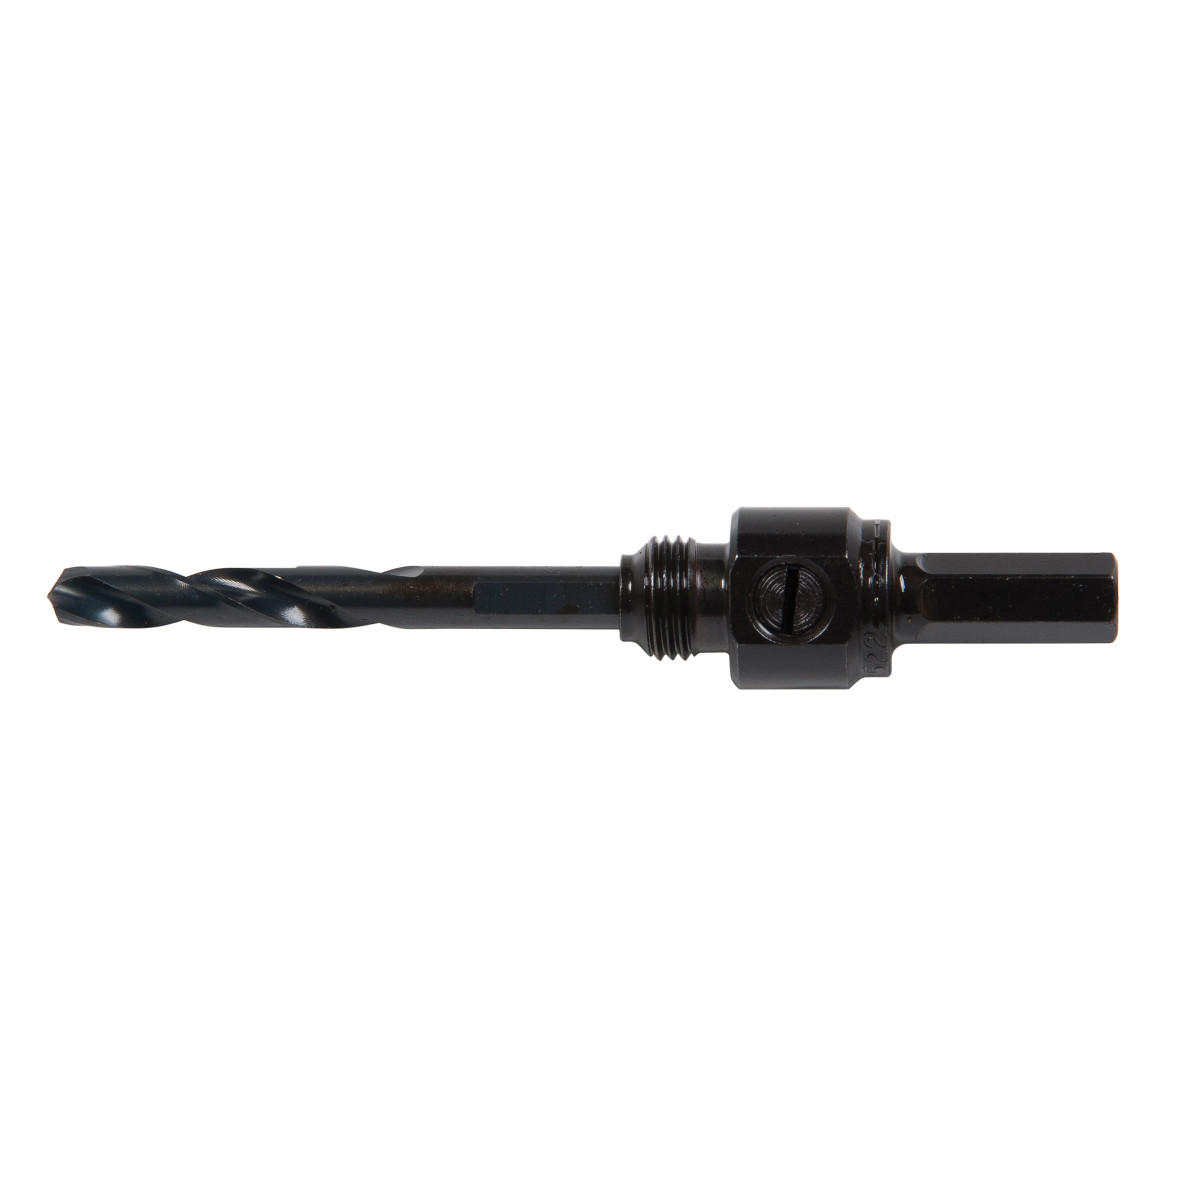 Shank Arbor with High-Speed Steel Pilot Drill Bit in Clamshell.  5/16" shank, 3/8" minimum chuck size.  Use with 9/16" - 1-3/16" Hole Saws.  The best arbor in the industry ensures a solid connection without any gaps or wobbling.  Arbors include replaceable, high-speed steel pilot drill.  Pilot drills have unique split-point tip design.  Use with Greenlee bi-metal hole saws, recessed light holesaws and carbide-grit hole saws (carbide-tipped pilot drill sold separately).  Can be used with Greenlee #901 or #904 bit extensions.